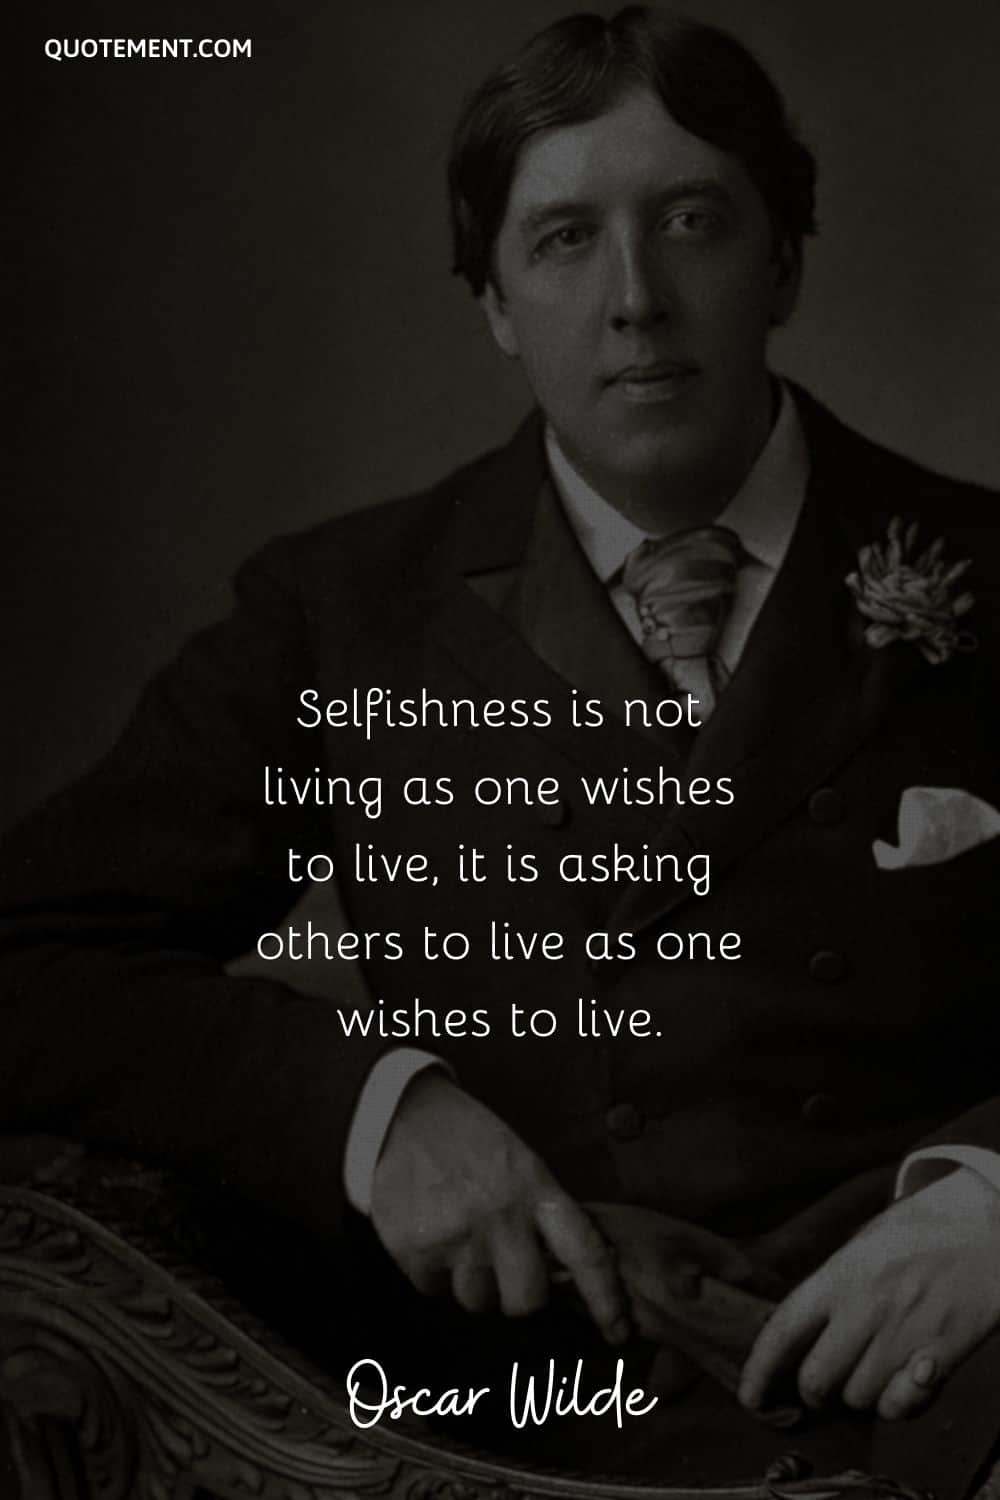 Selfishness is not living as one wishes to live, it is asking others to live as one wishes to live